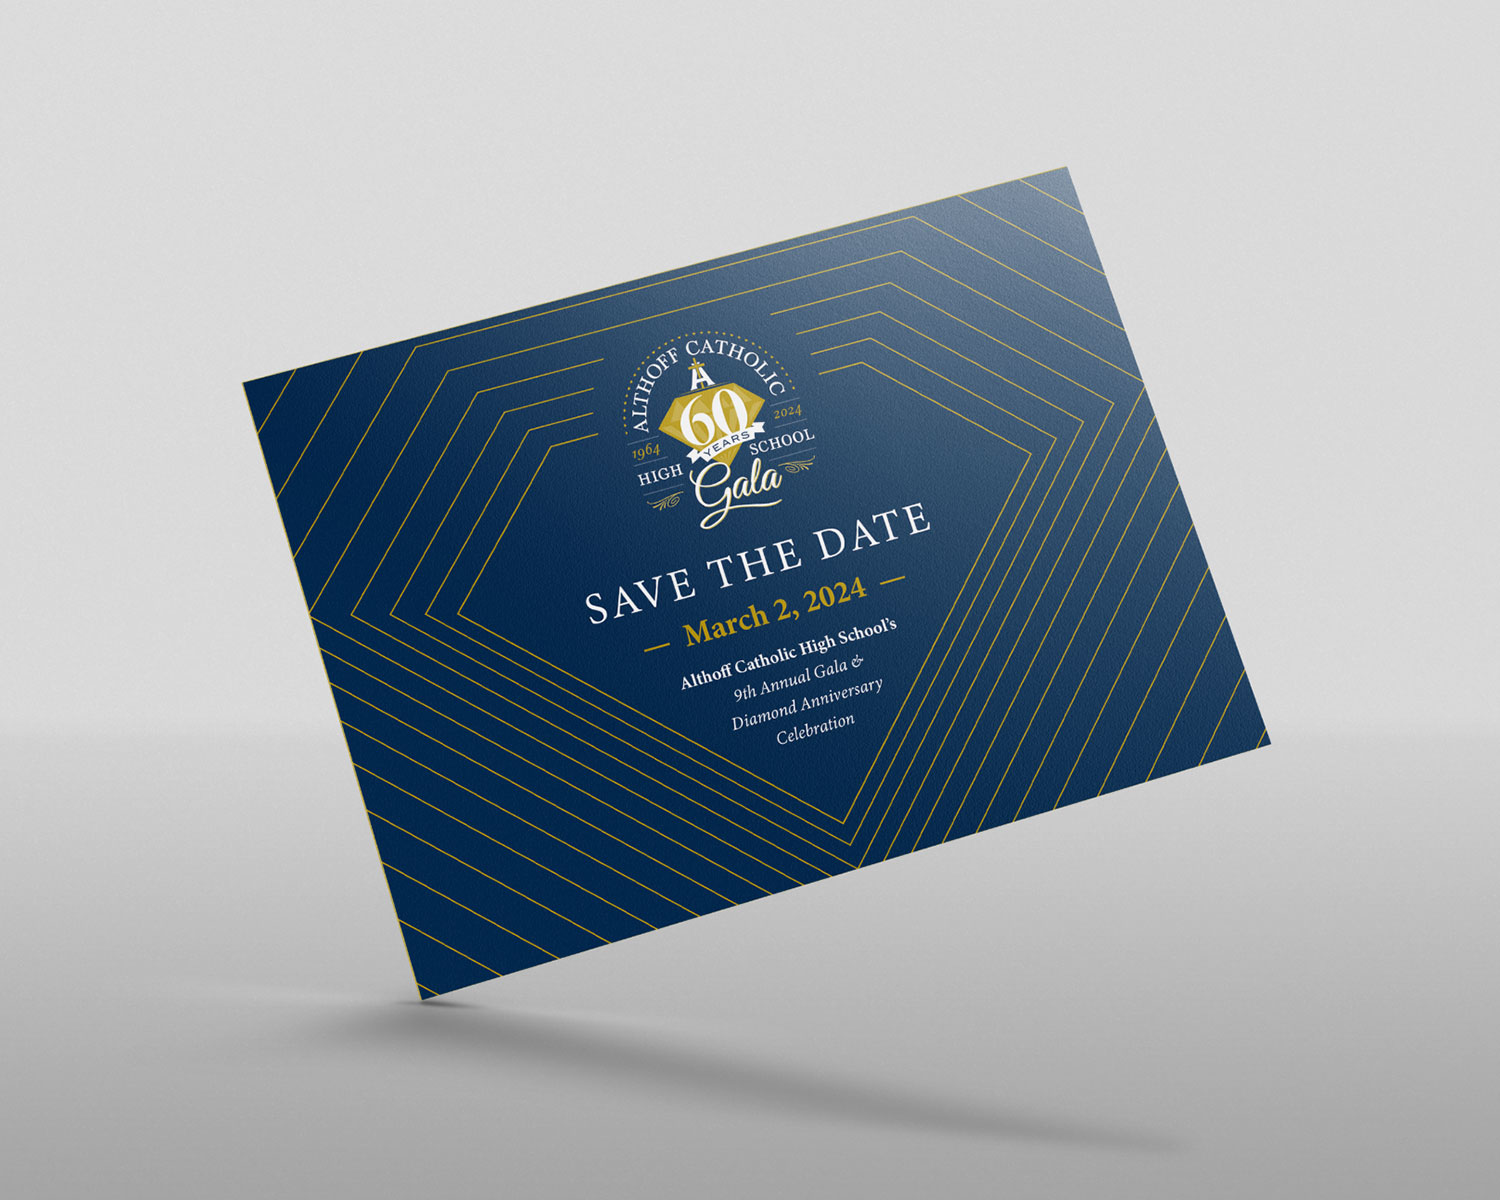 ACHS 60th anniversary save the date 2